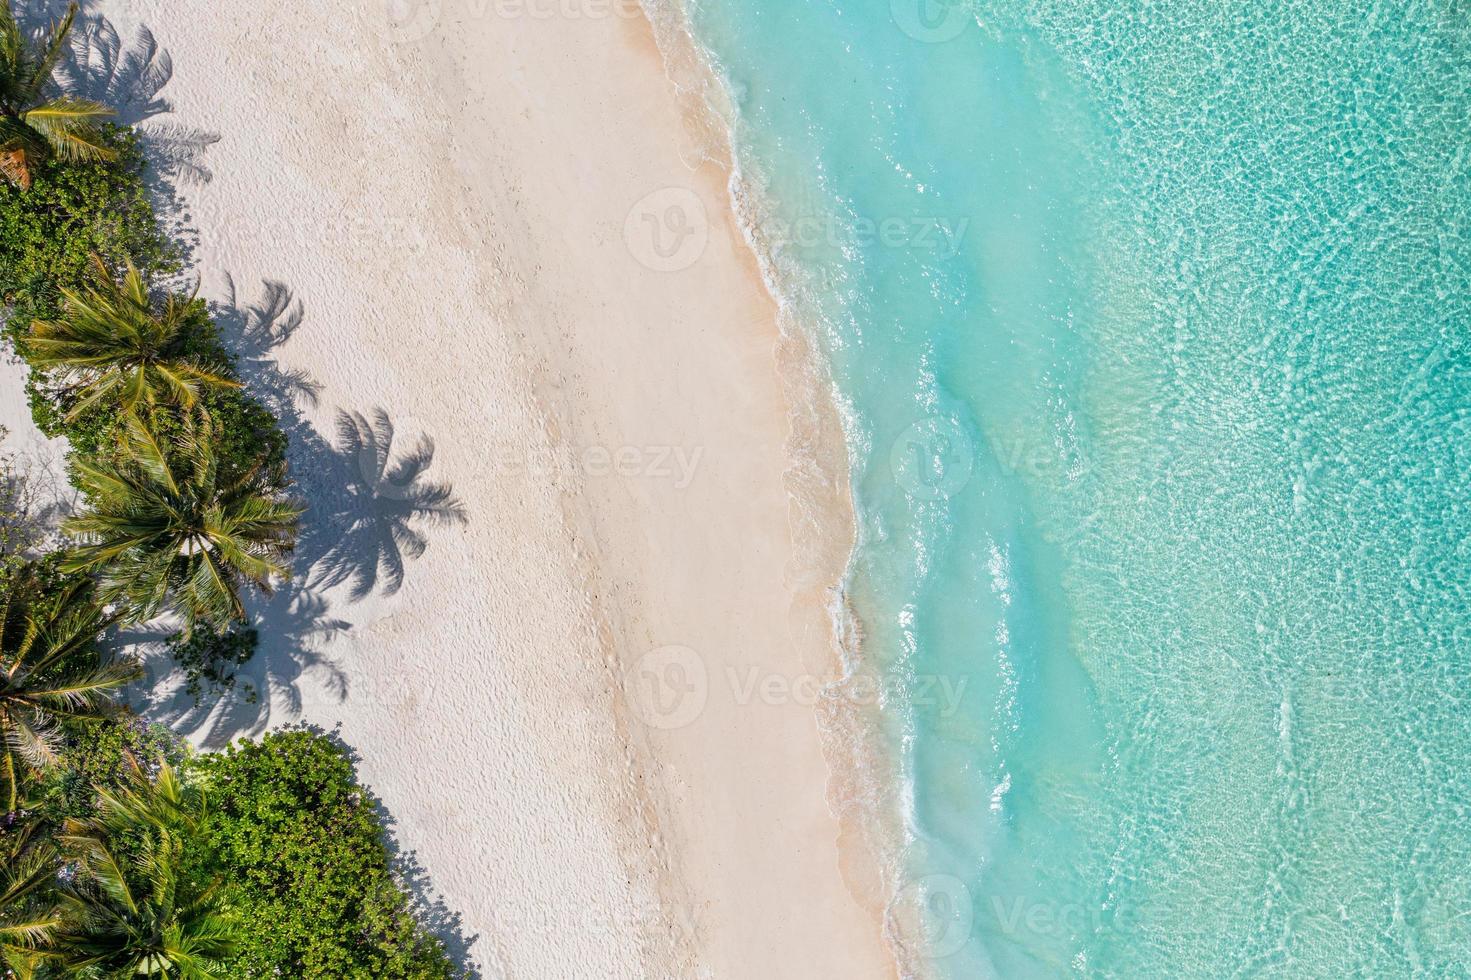 Aerial top view on sand beach. Tropical beach with white sand turquoise sea, palm trees under sunlight. Drone view, luxury travel destination scenic, vacation landscape. Amazing nature paradise island photo